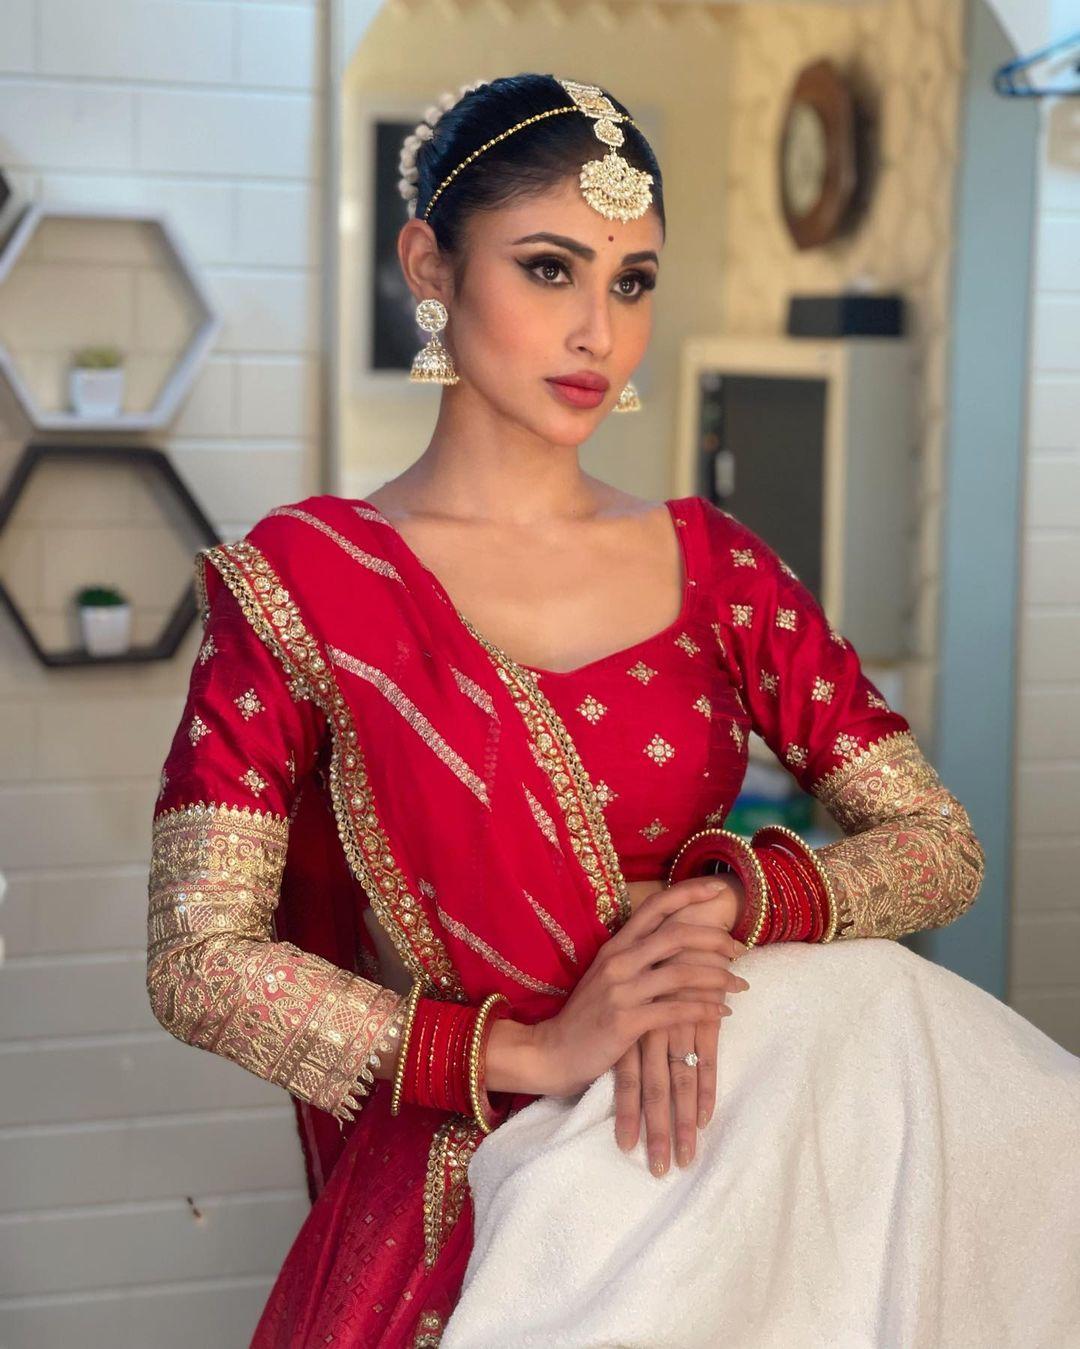 Mouni Roy's outfit choice, a stunning red lehenga with intricate golden designs and a graceful dupatta, is more than just a fashion statement – it's the perfect choice for Dashami. The detailed zari work on her blouse, along with the small embellishments, beautifully focuses on tradition.